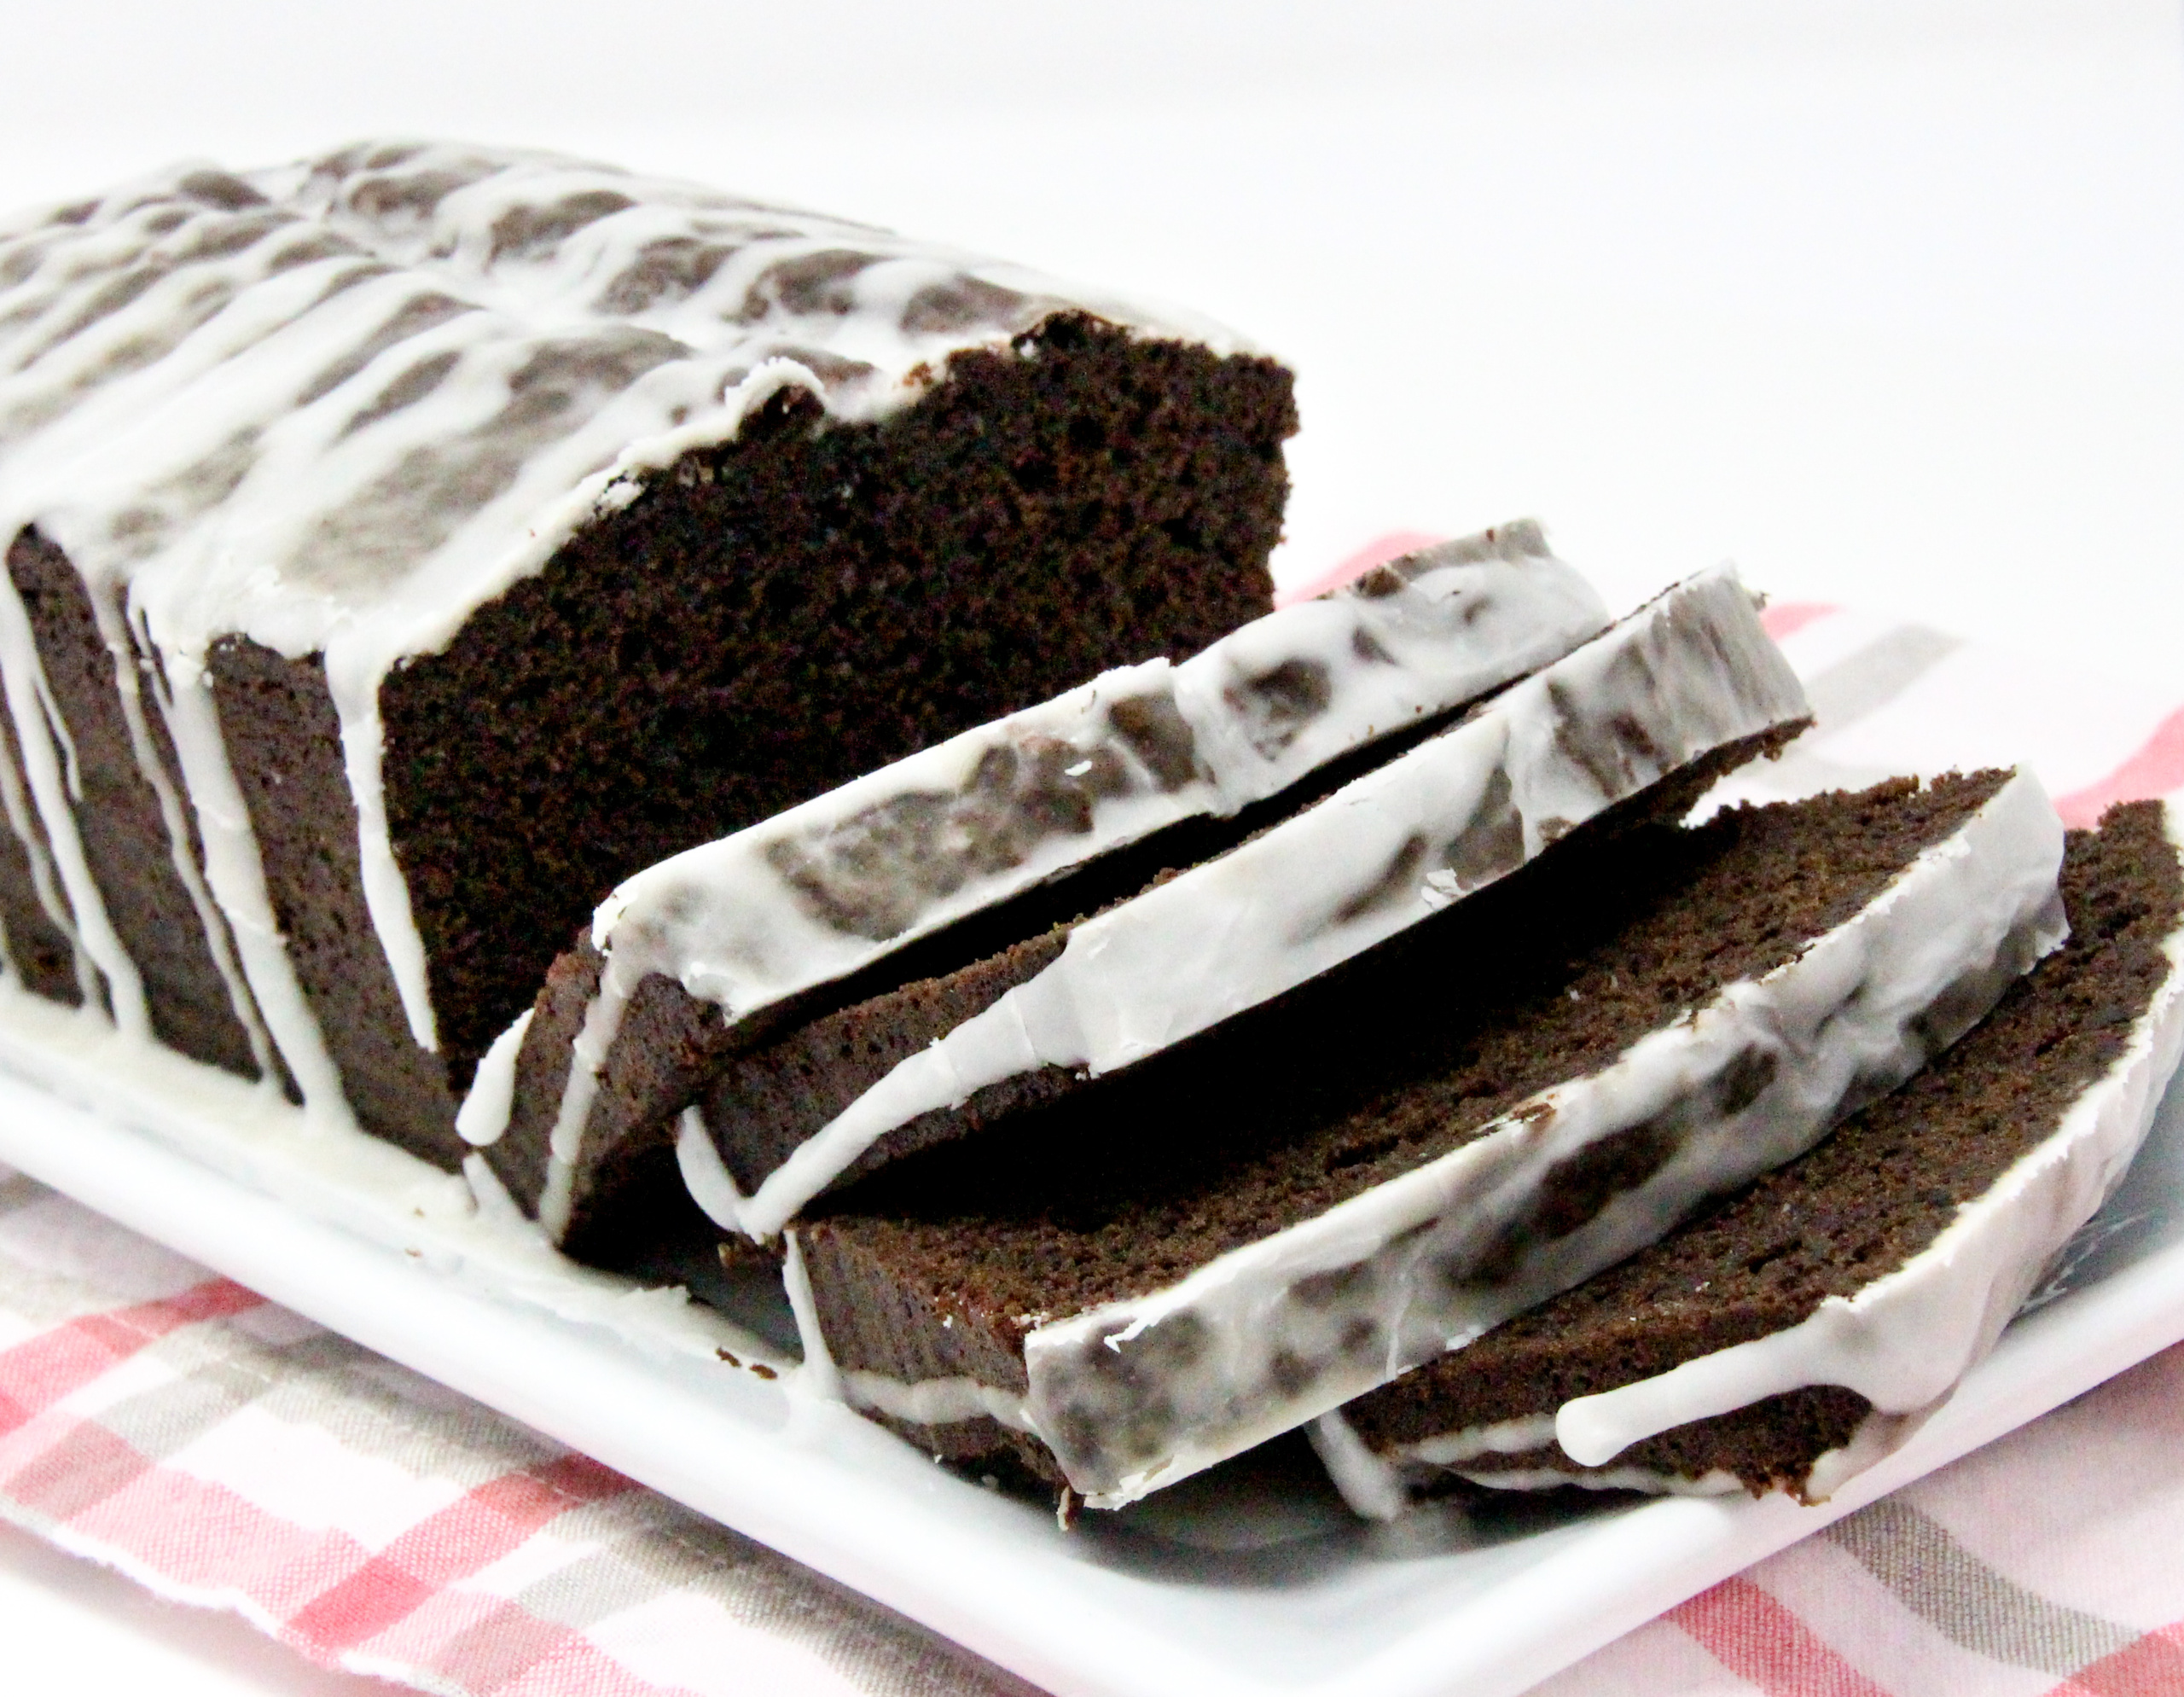 Chocolate Loaf Cake with Vanilla Drizzle has a moist crumb with a yummy chocolate flavor topped with vanilla glaze. On its own or served with ice cream, this loaf cake is a delicious way to end a meal or enjoy as a snack. Recipe shared with permission granted by Lucy Burdette, author of A CLUE IN THE CRUMBS.